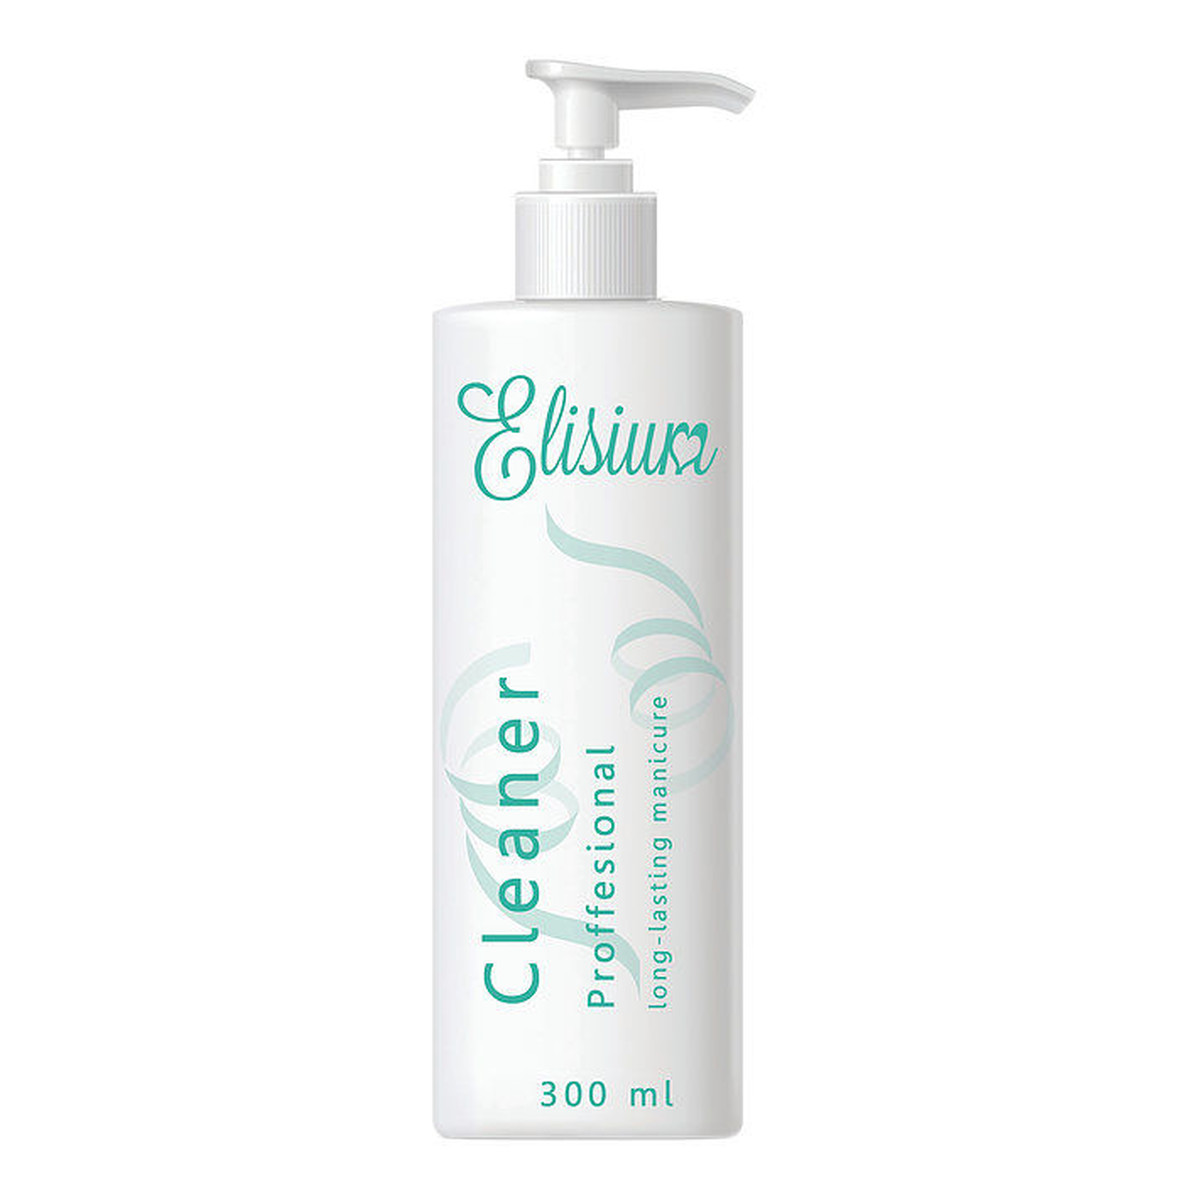 Elisium Cleaner Proffesional Cleaner 300ml